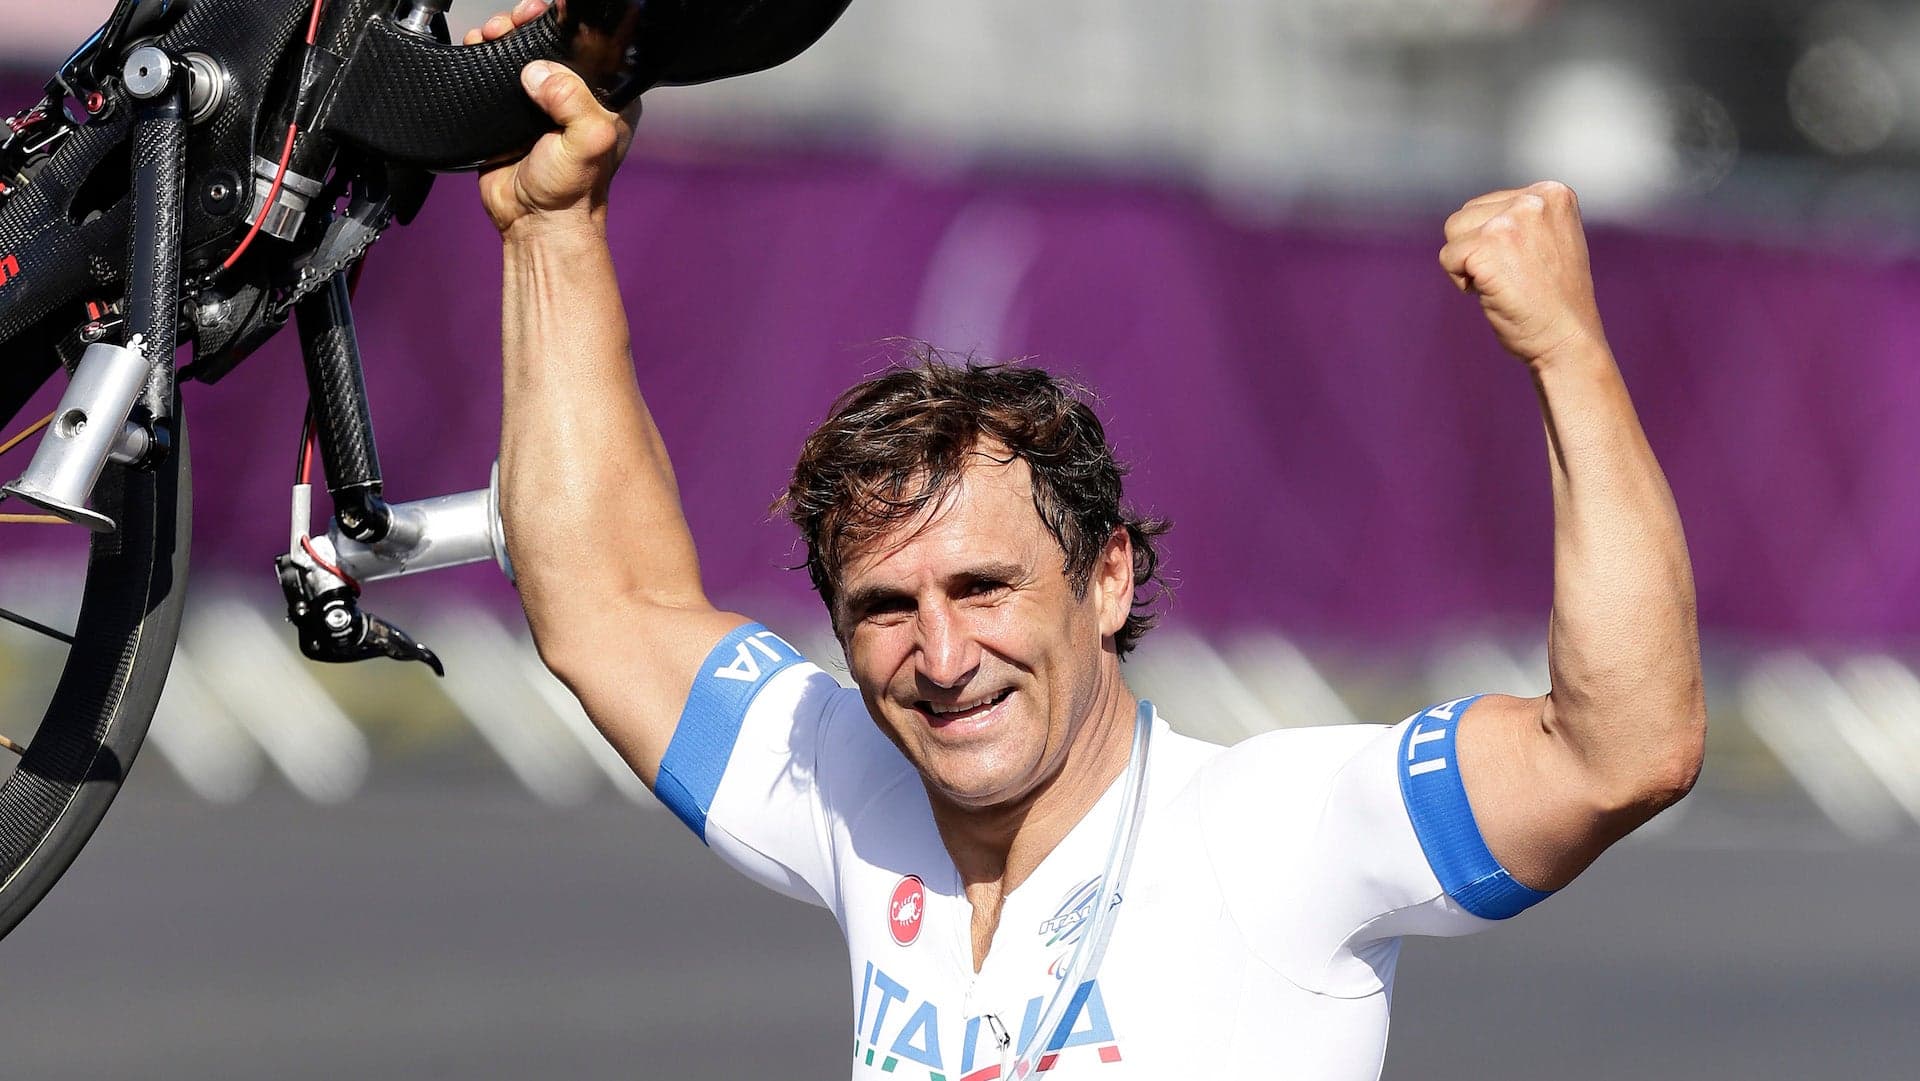 Alex Zanardi Is Able to Speak to His Family After Most Recent Surgery: Report